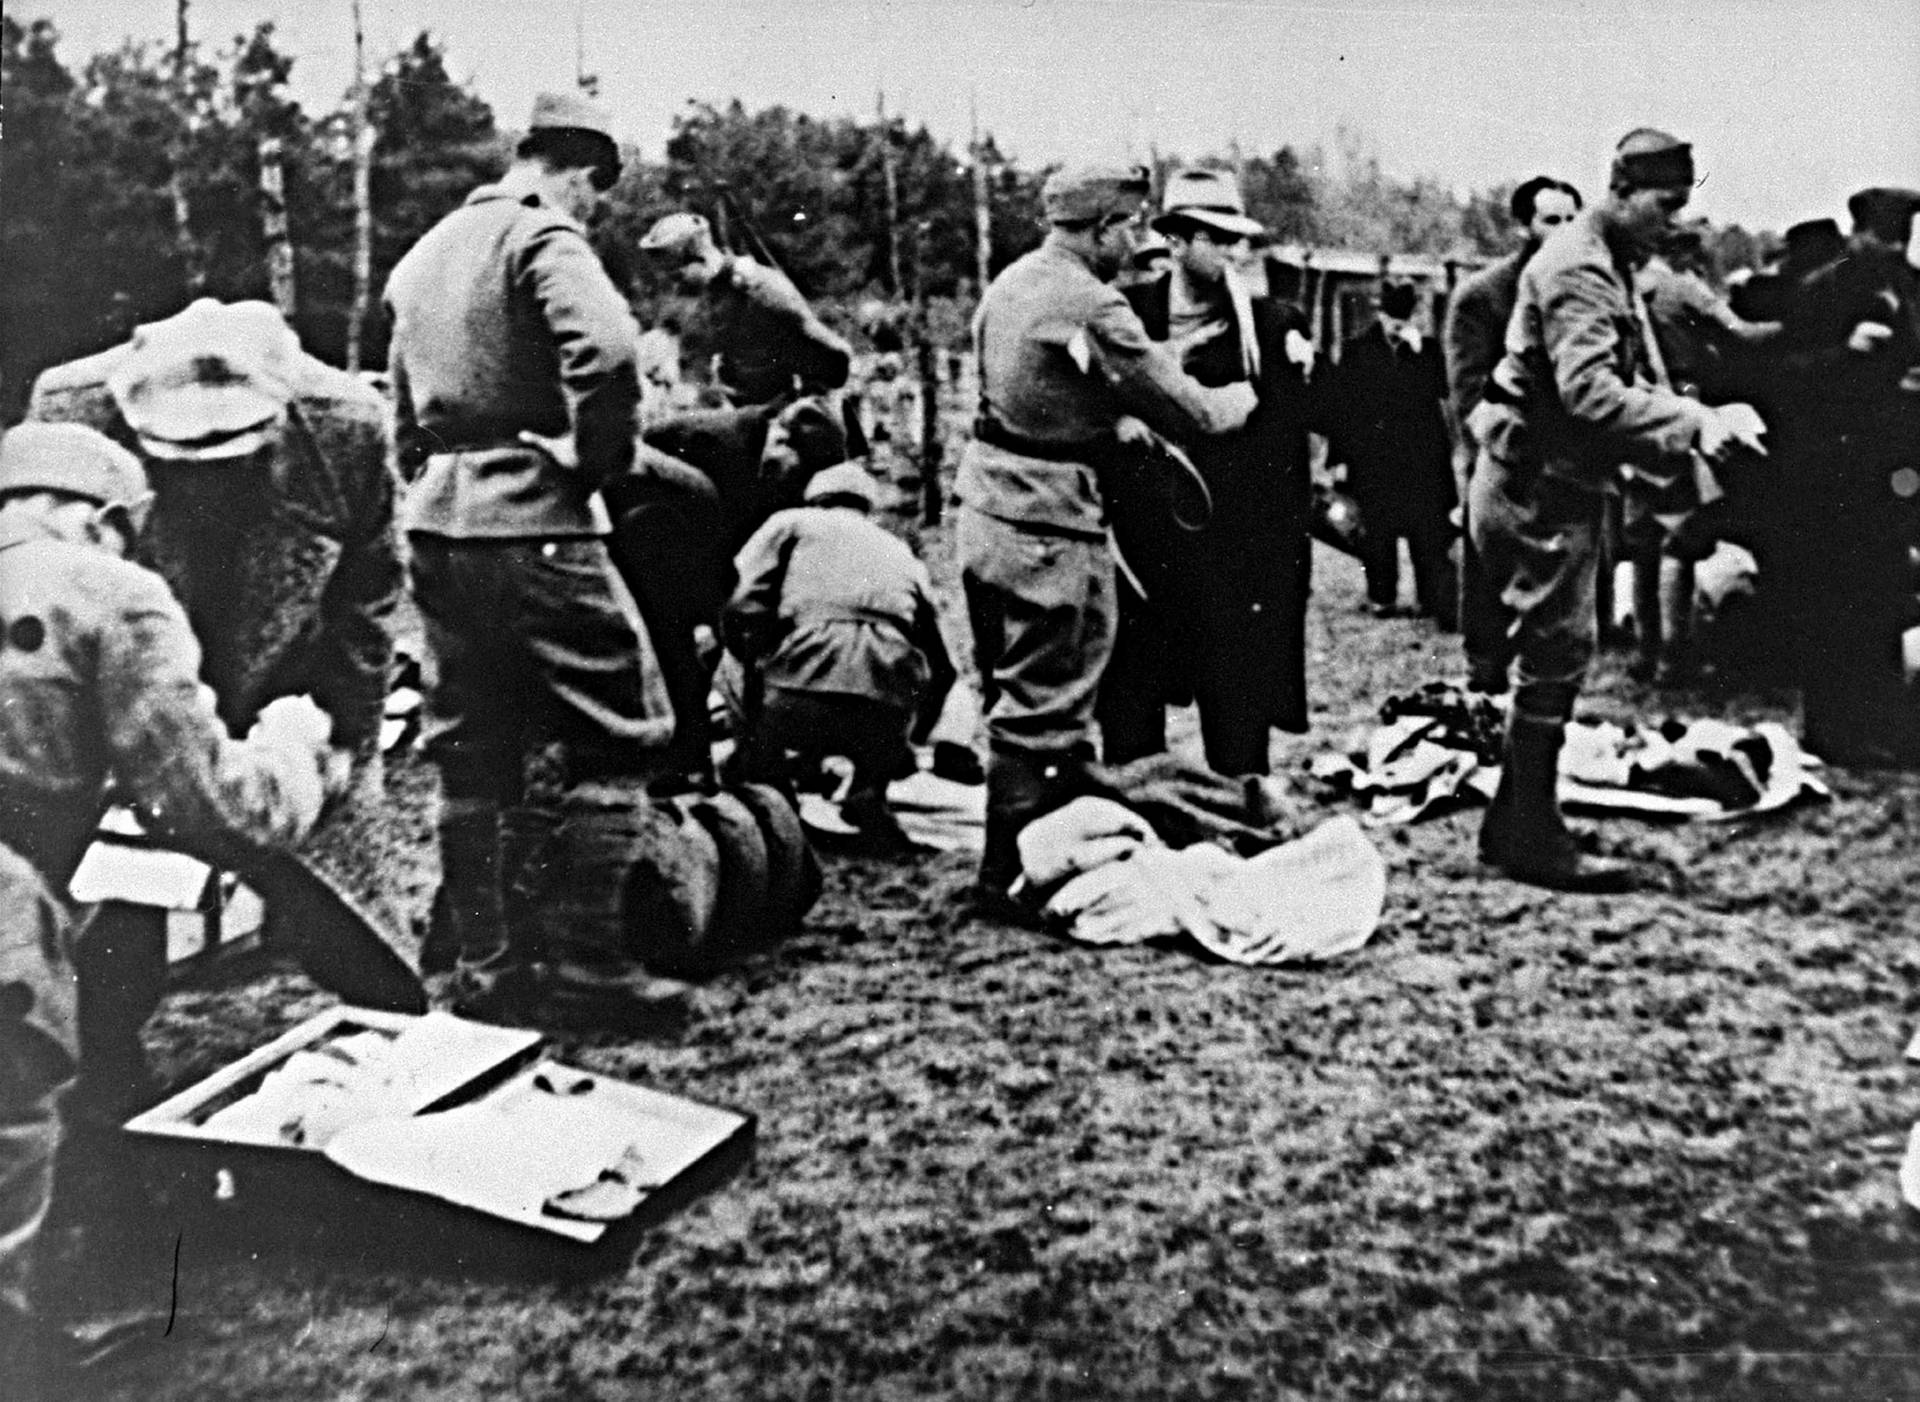 Belongings of newly arrived prisoners are seized by the Ustasha in Jasenovac. The Ustasha (Croatian Revolutionary Movement) was a fascist organization, active between 1929 and 1945.